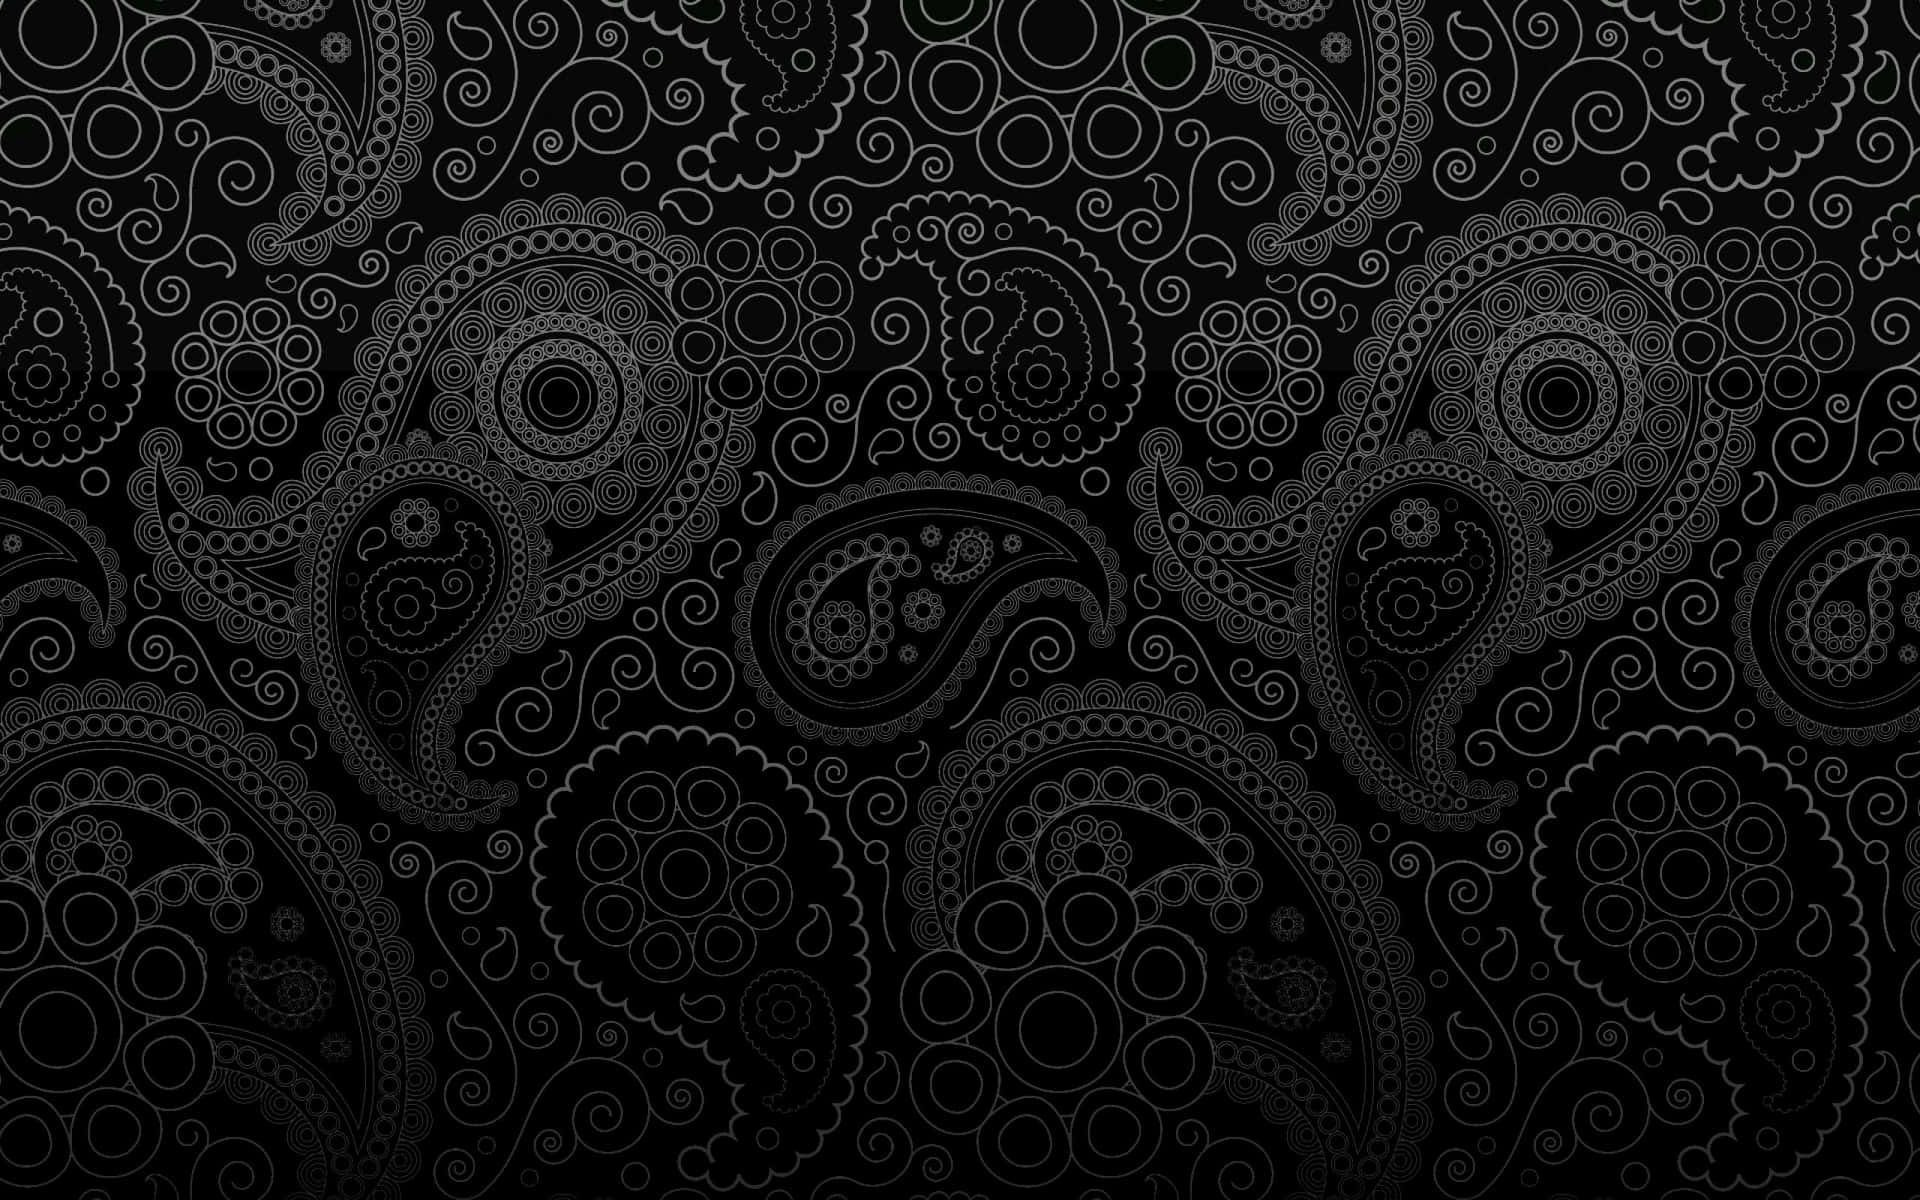 A Black Paisley Wallpaper With A Black Background